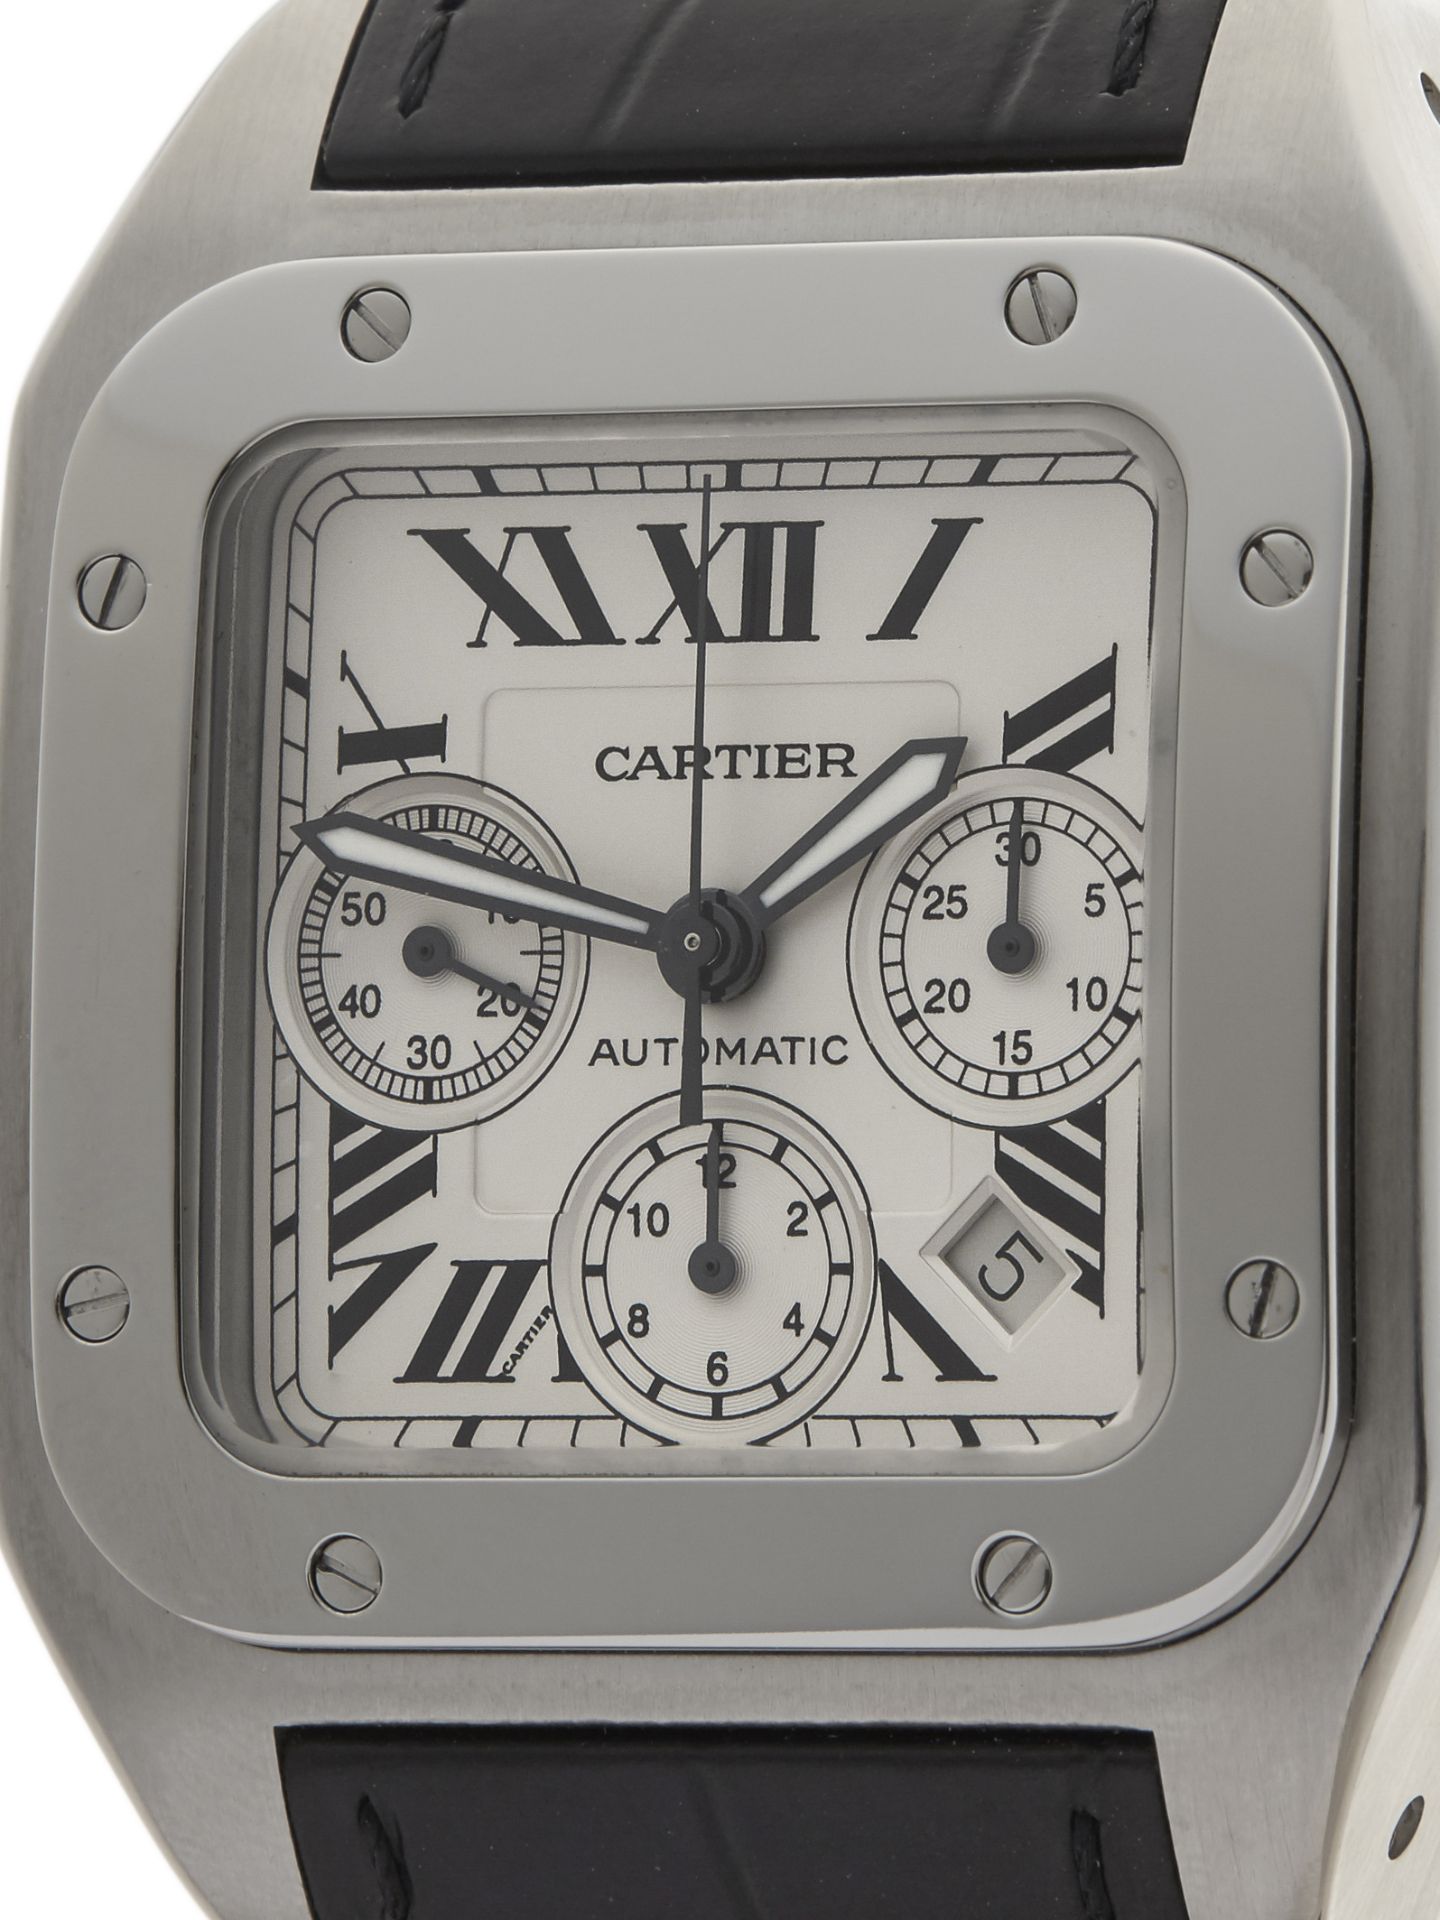 Cartier Santos 100 XL Chronograph 41mm Stainless Steel 2740 or W20090X8 - Image 3 of 9